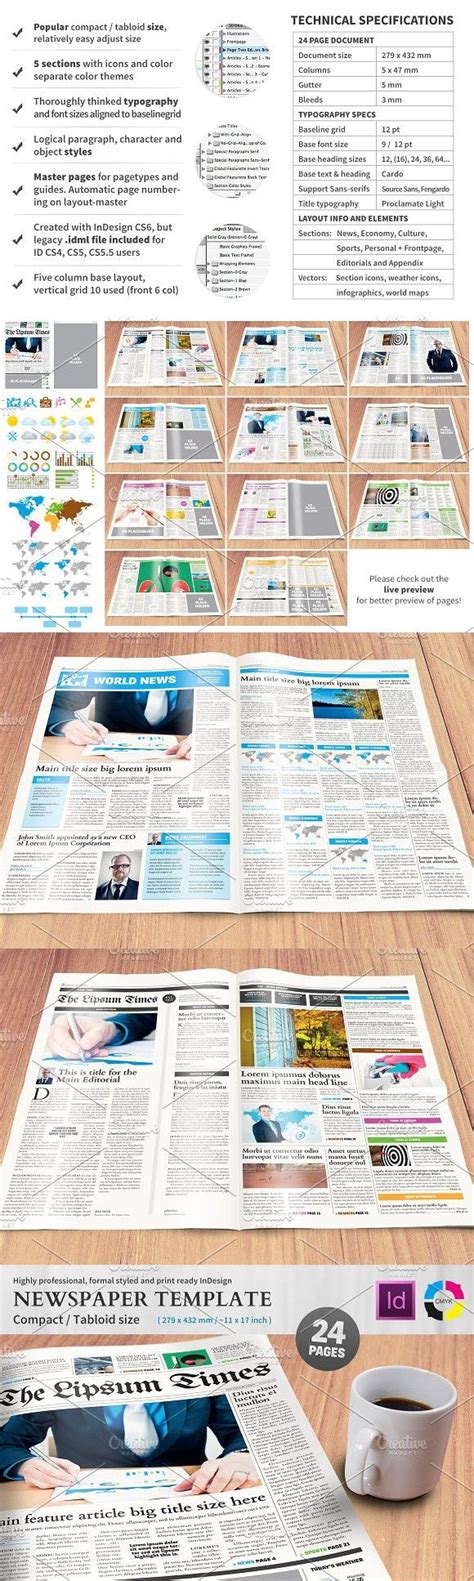 Tabloids tabloid newspapers are traditionally smaller and squarer in shape than the broadsheet. Newspaper Template - compact/tabloid | Newspaper template, Templates, Indesign templates